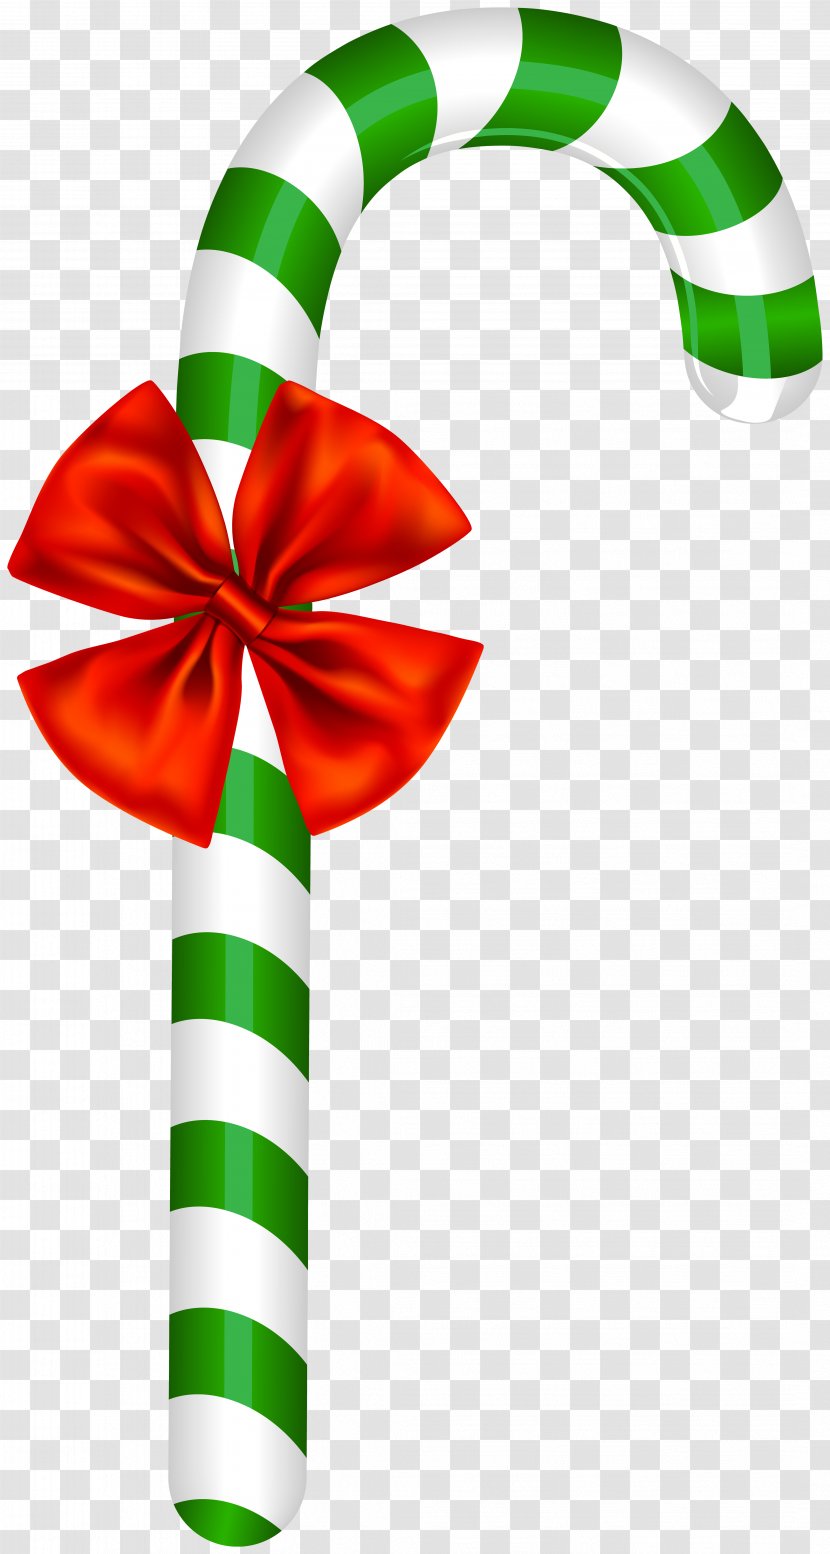 Candy Cane Christmas Day Image Clip Art - Canes - Peppermint Transparent PNG